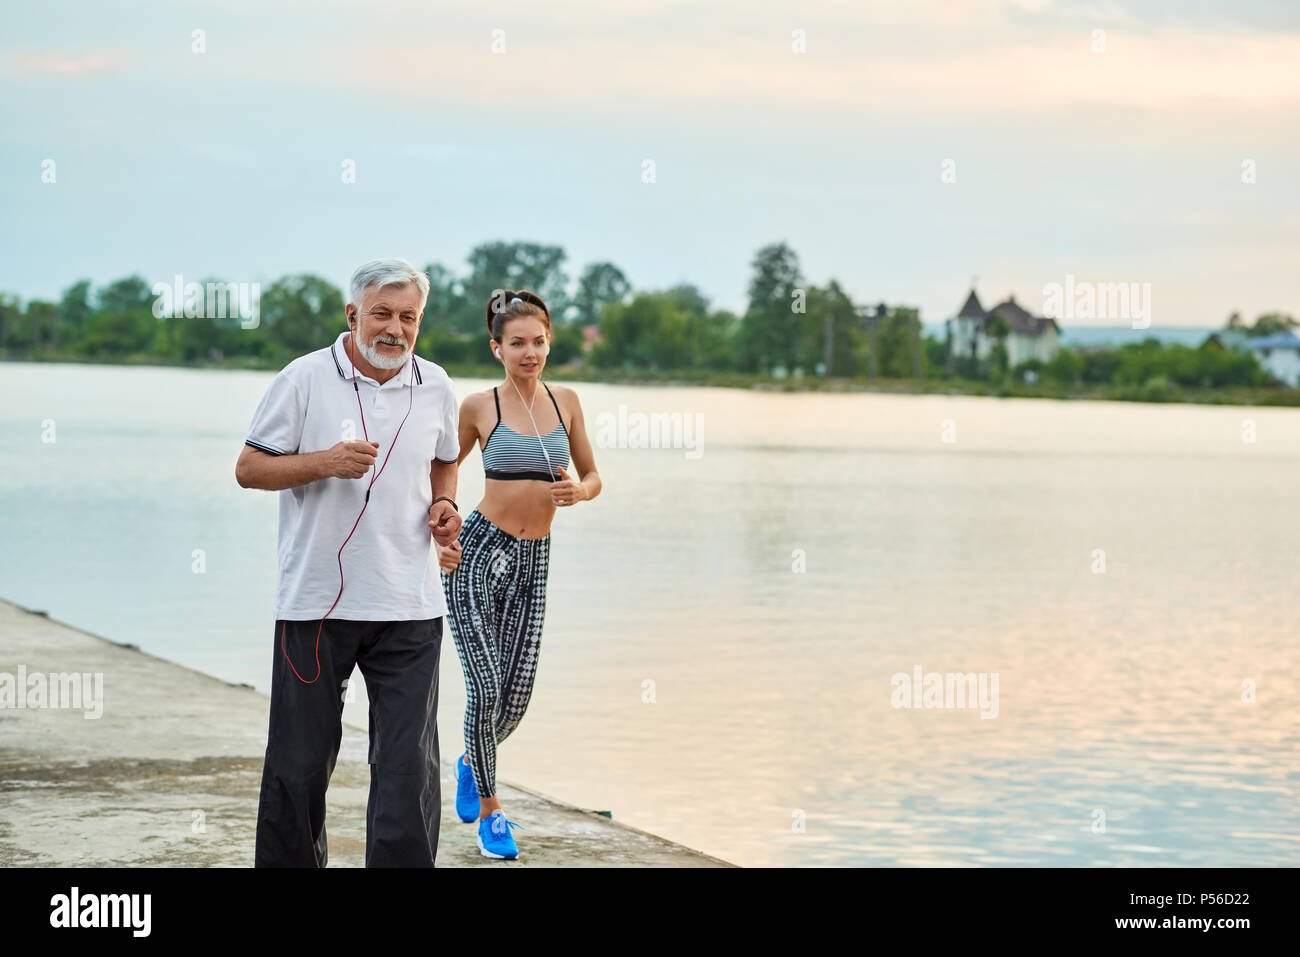 Senior man and active young girl running near city lake. Active lifestyle, healthy body. Sport, yoga, fitness. Different generations. Models having strong, fit figures. Modern sportswear. Stock Photo